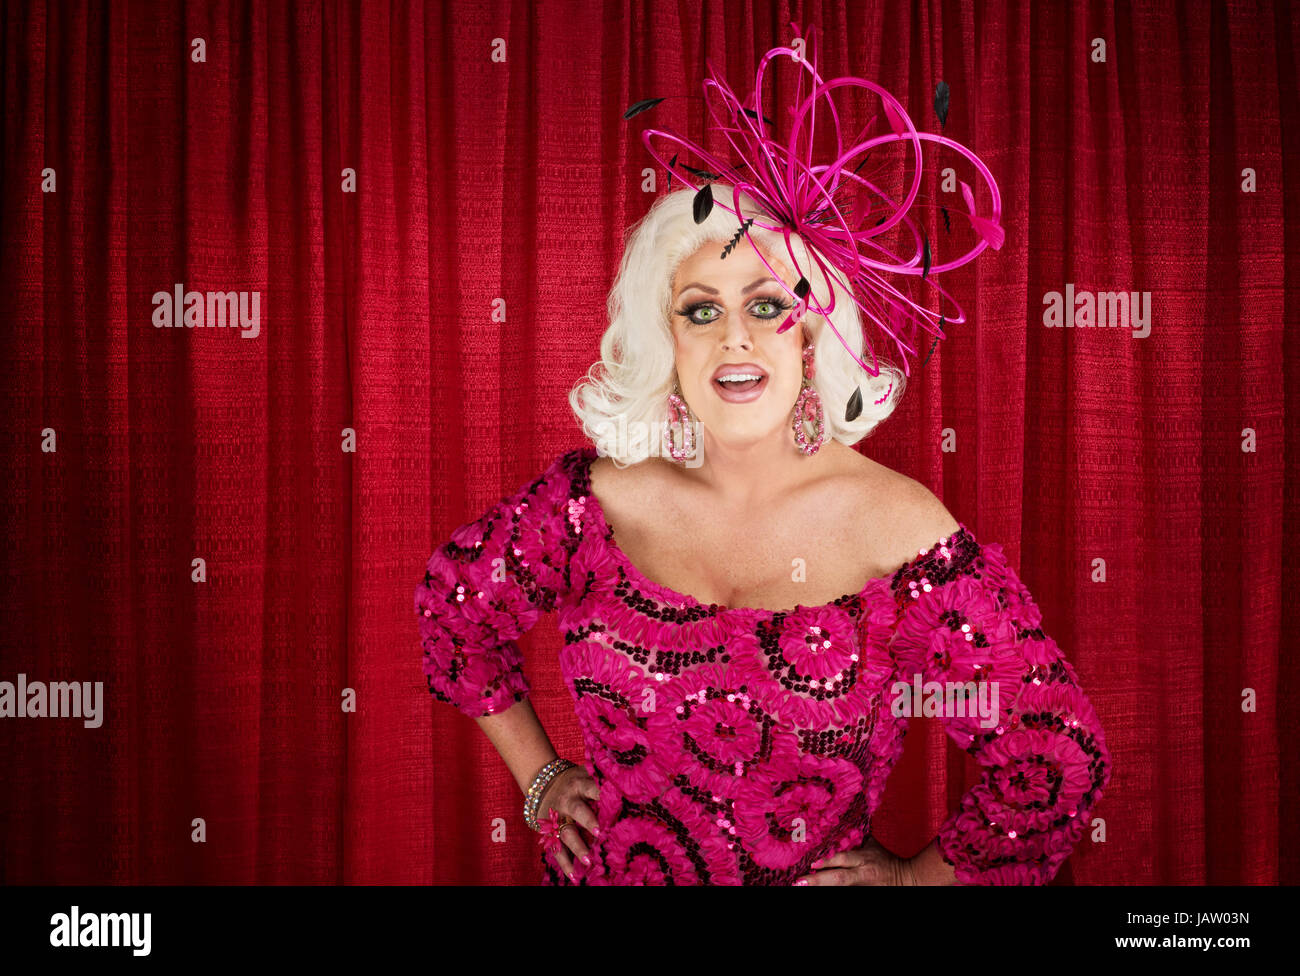 Blond drag queen with hands on hips Stock Photo